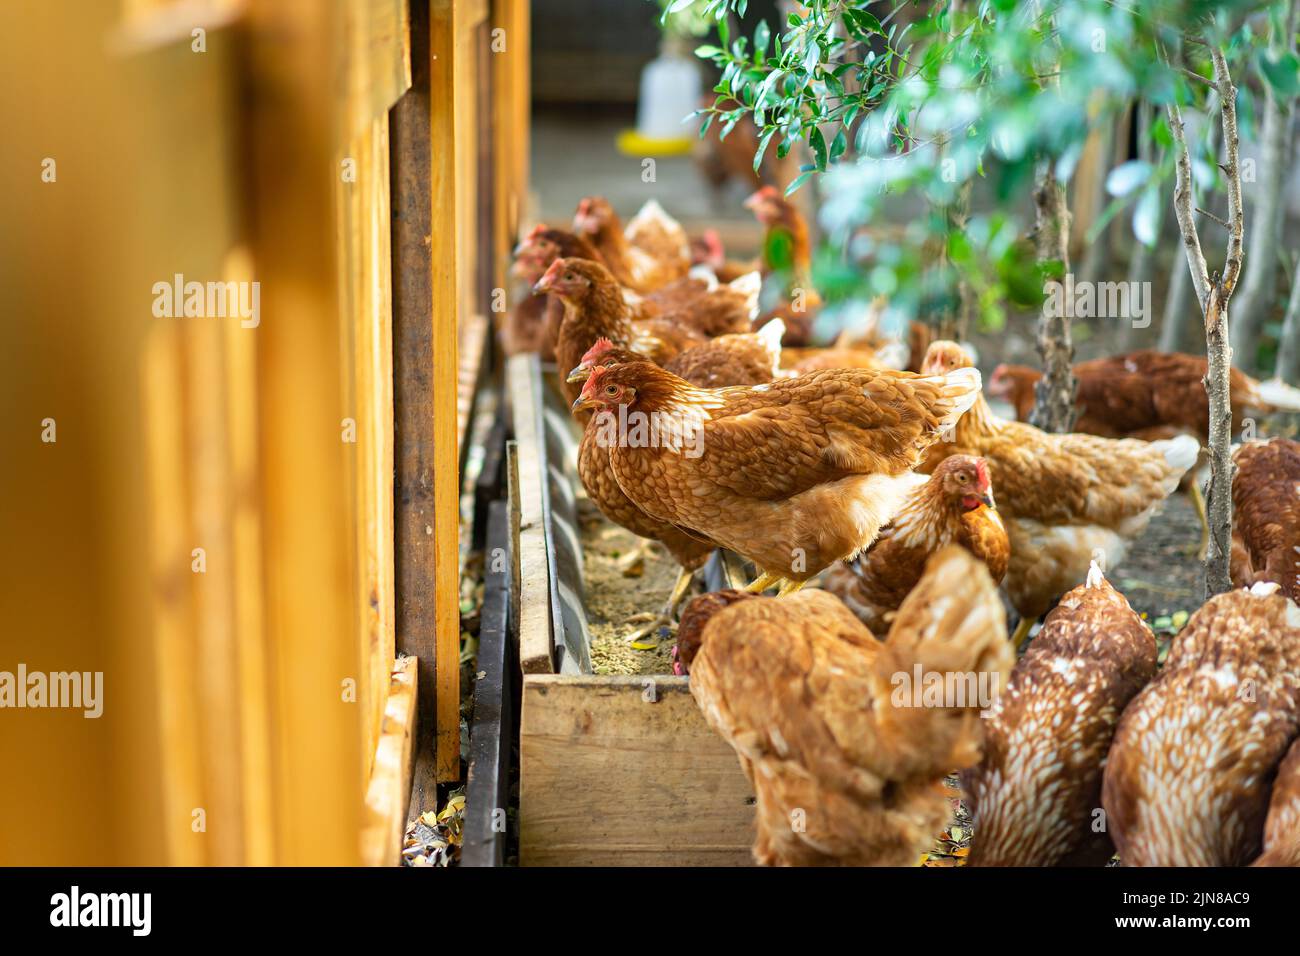 Hybrid Rhode Island Red hens are eating at the feeding trough near the brown fence. Stock Photo